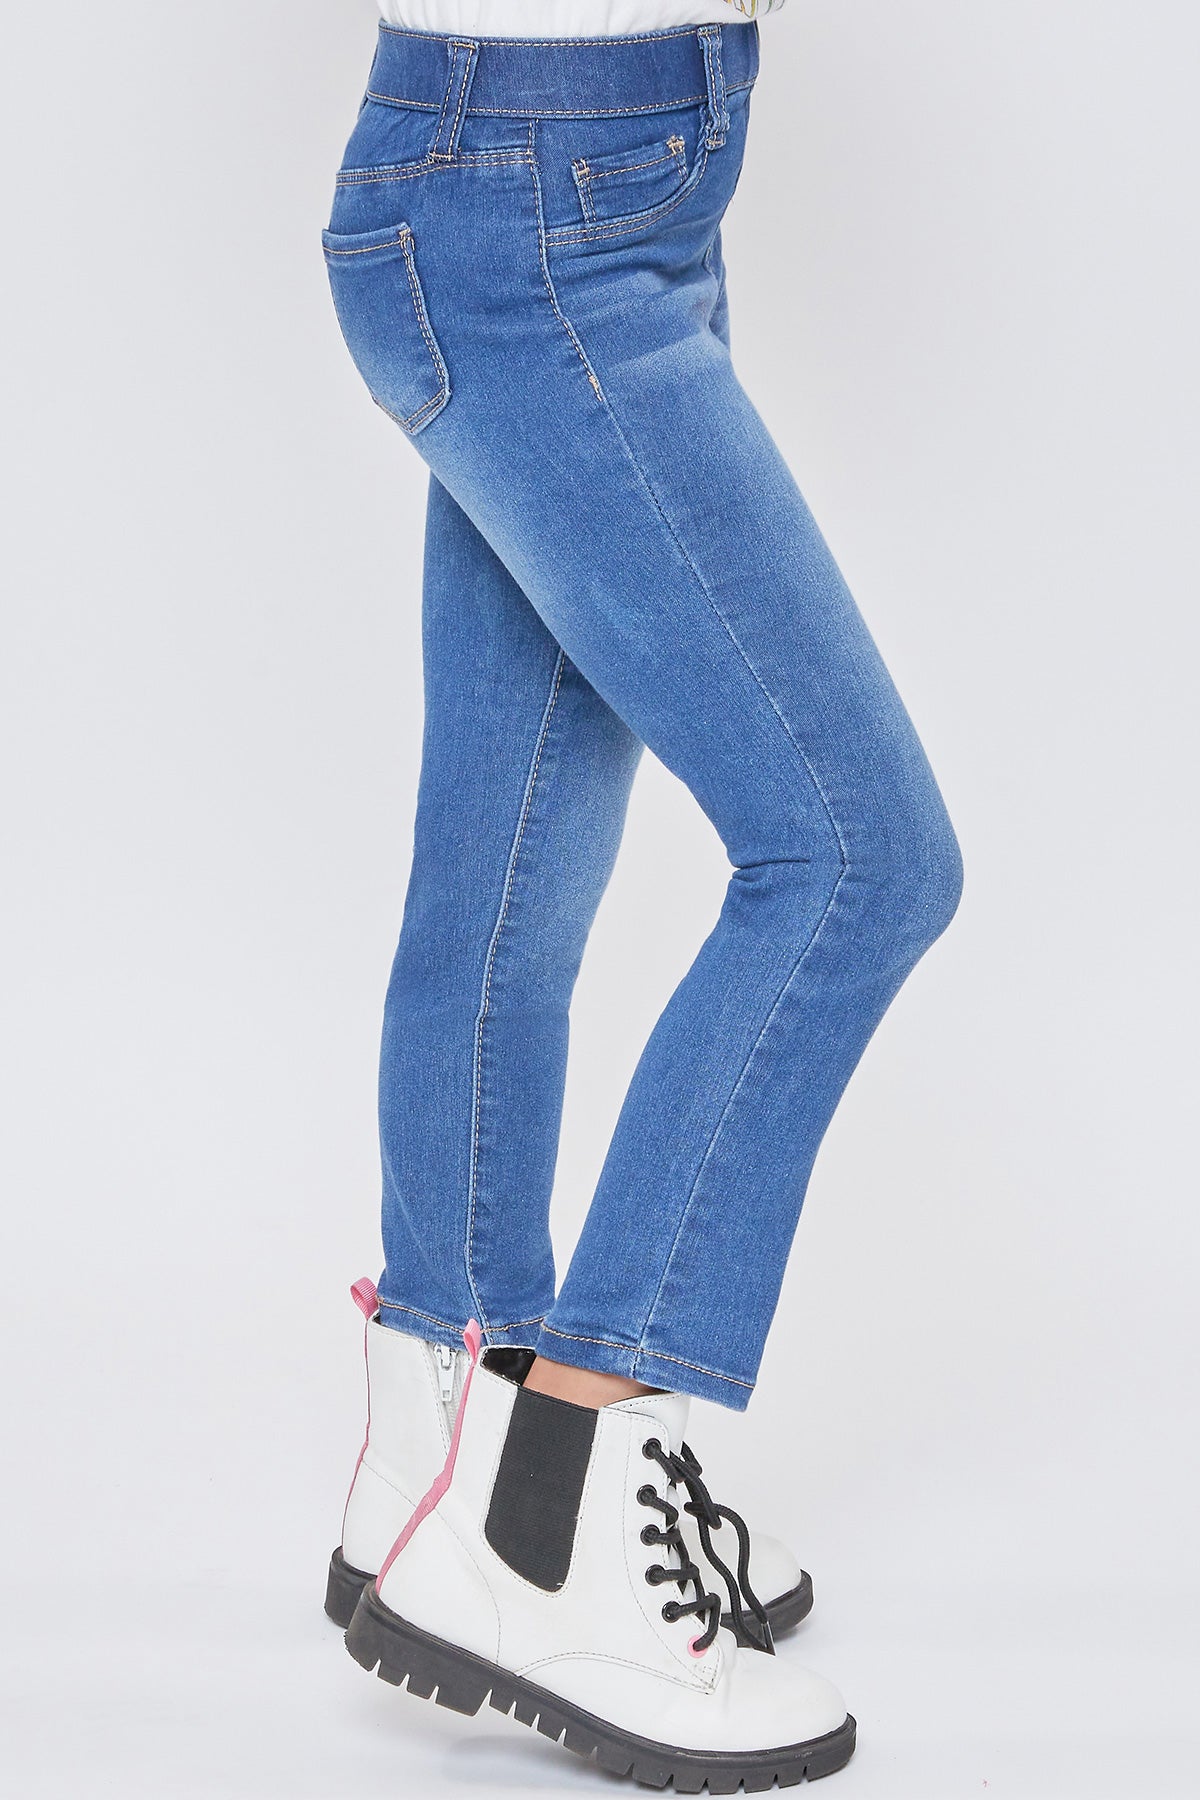 Missy Plus Size Wannabettabutt 3 Button Mid-Rise High-Rise Skinny Jean 12 Pack from Royalty for Me